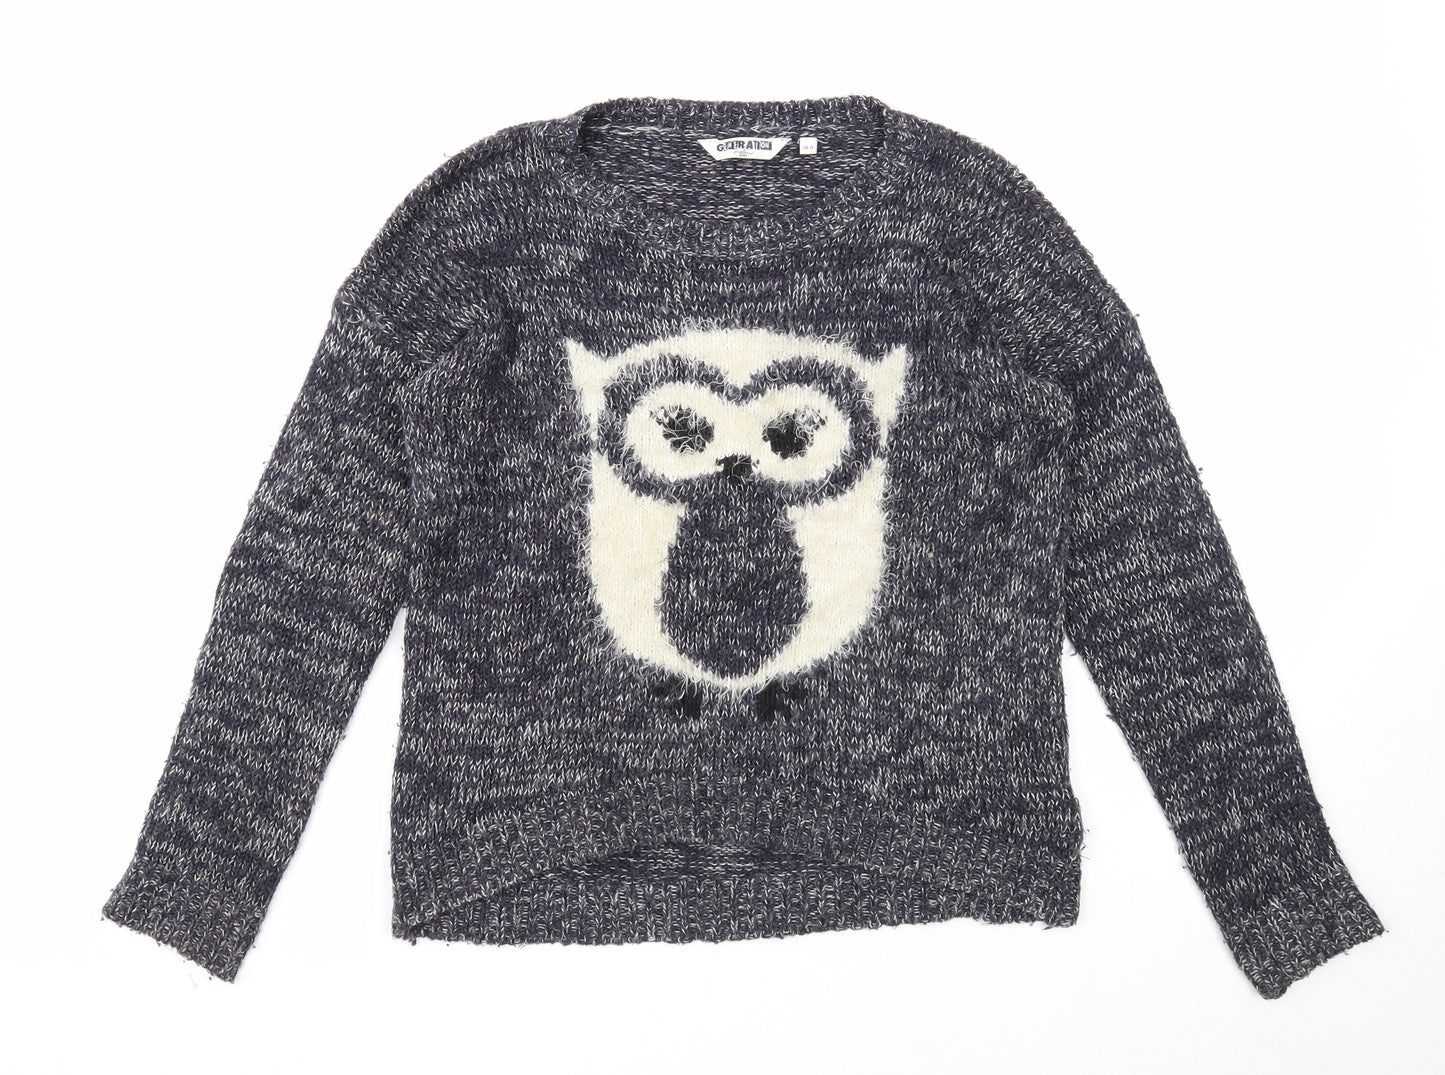 New Look Girls Black Round Neck Acrylic Pullover Jumper Size 10-11 Years Pullover - Owl